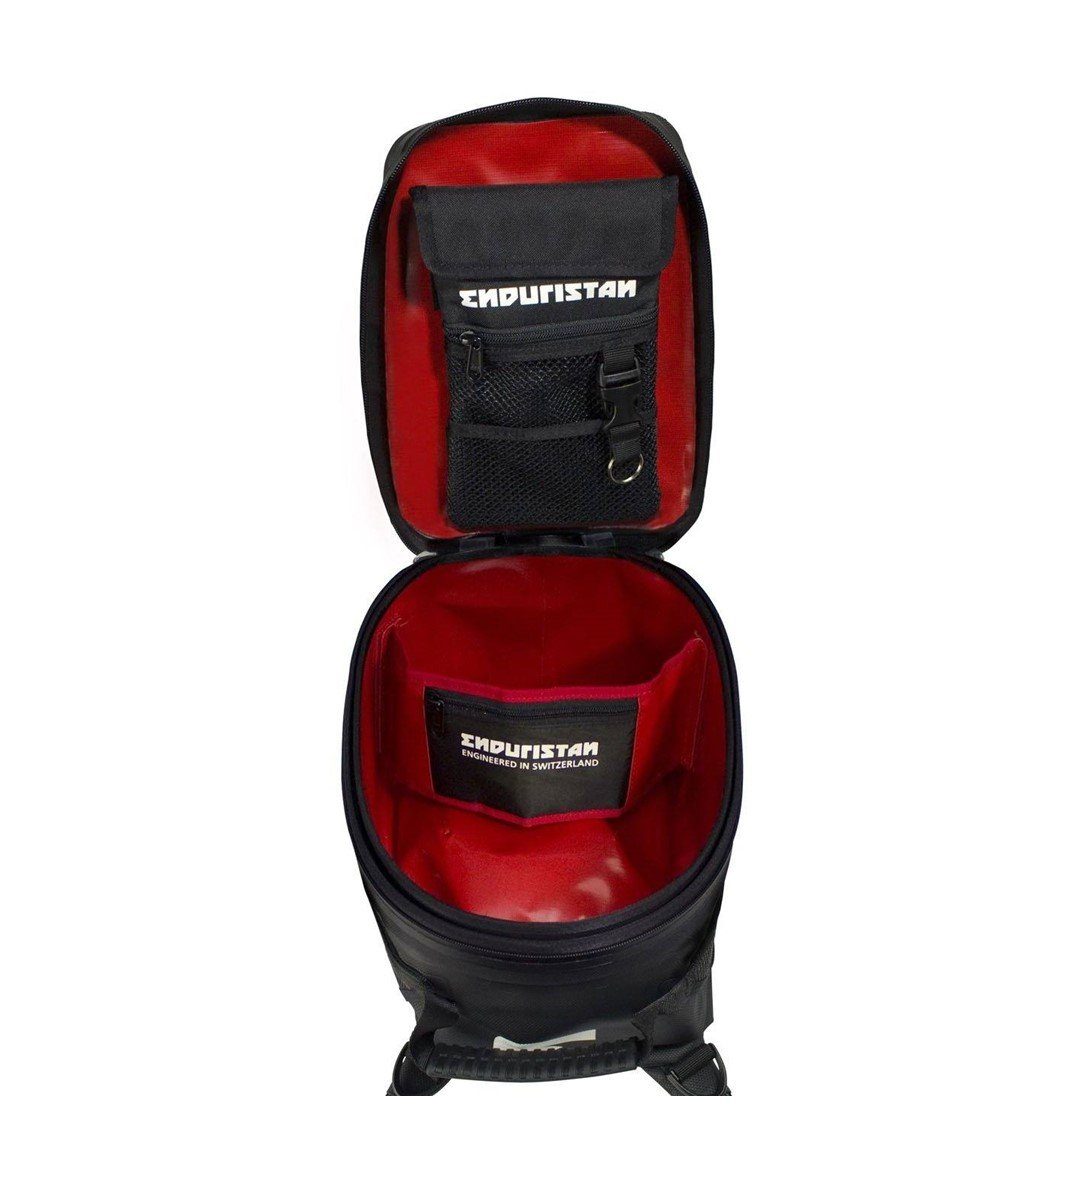 SANDSTORM 4H TANK BAG, LUTA-008, enduristan, luggage, sandstorm, tank bags, waterproof, Tank Bags - Imported and distributed in North & South America by Lindeco Genuine Powersports - Premier Powersports Equipment and Accessories for Motorcycle Enthusiasts, Professional Riders and Dealers.